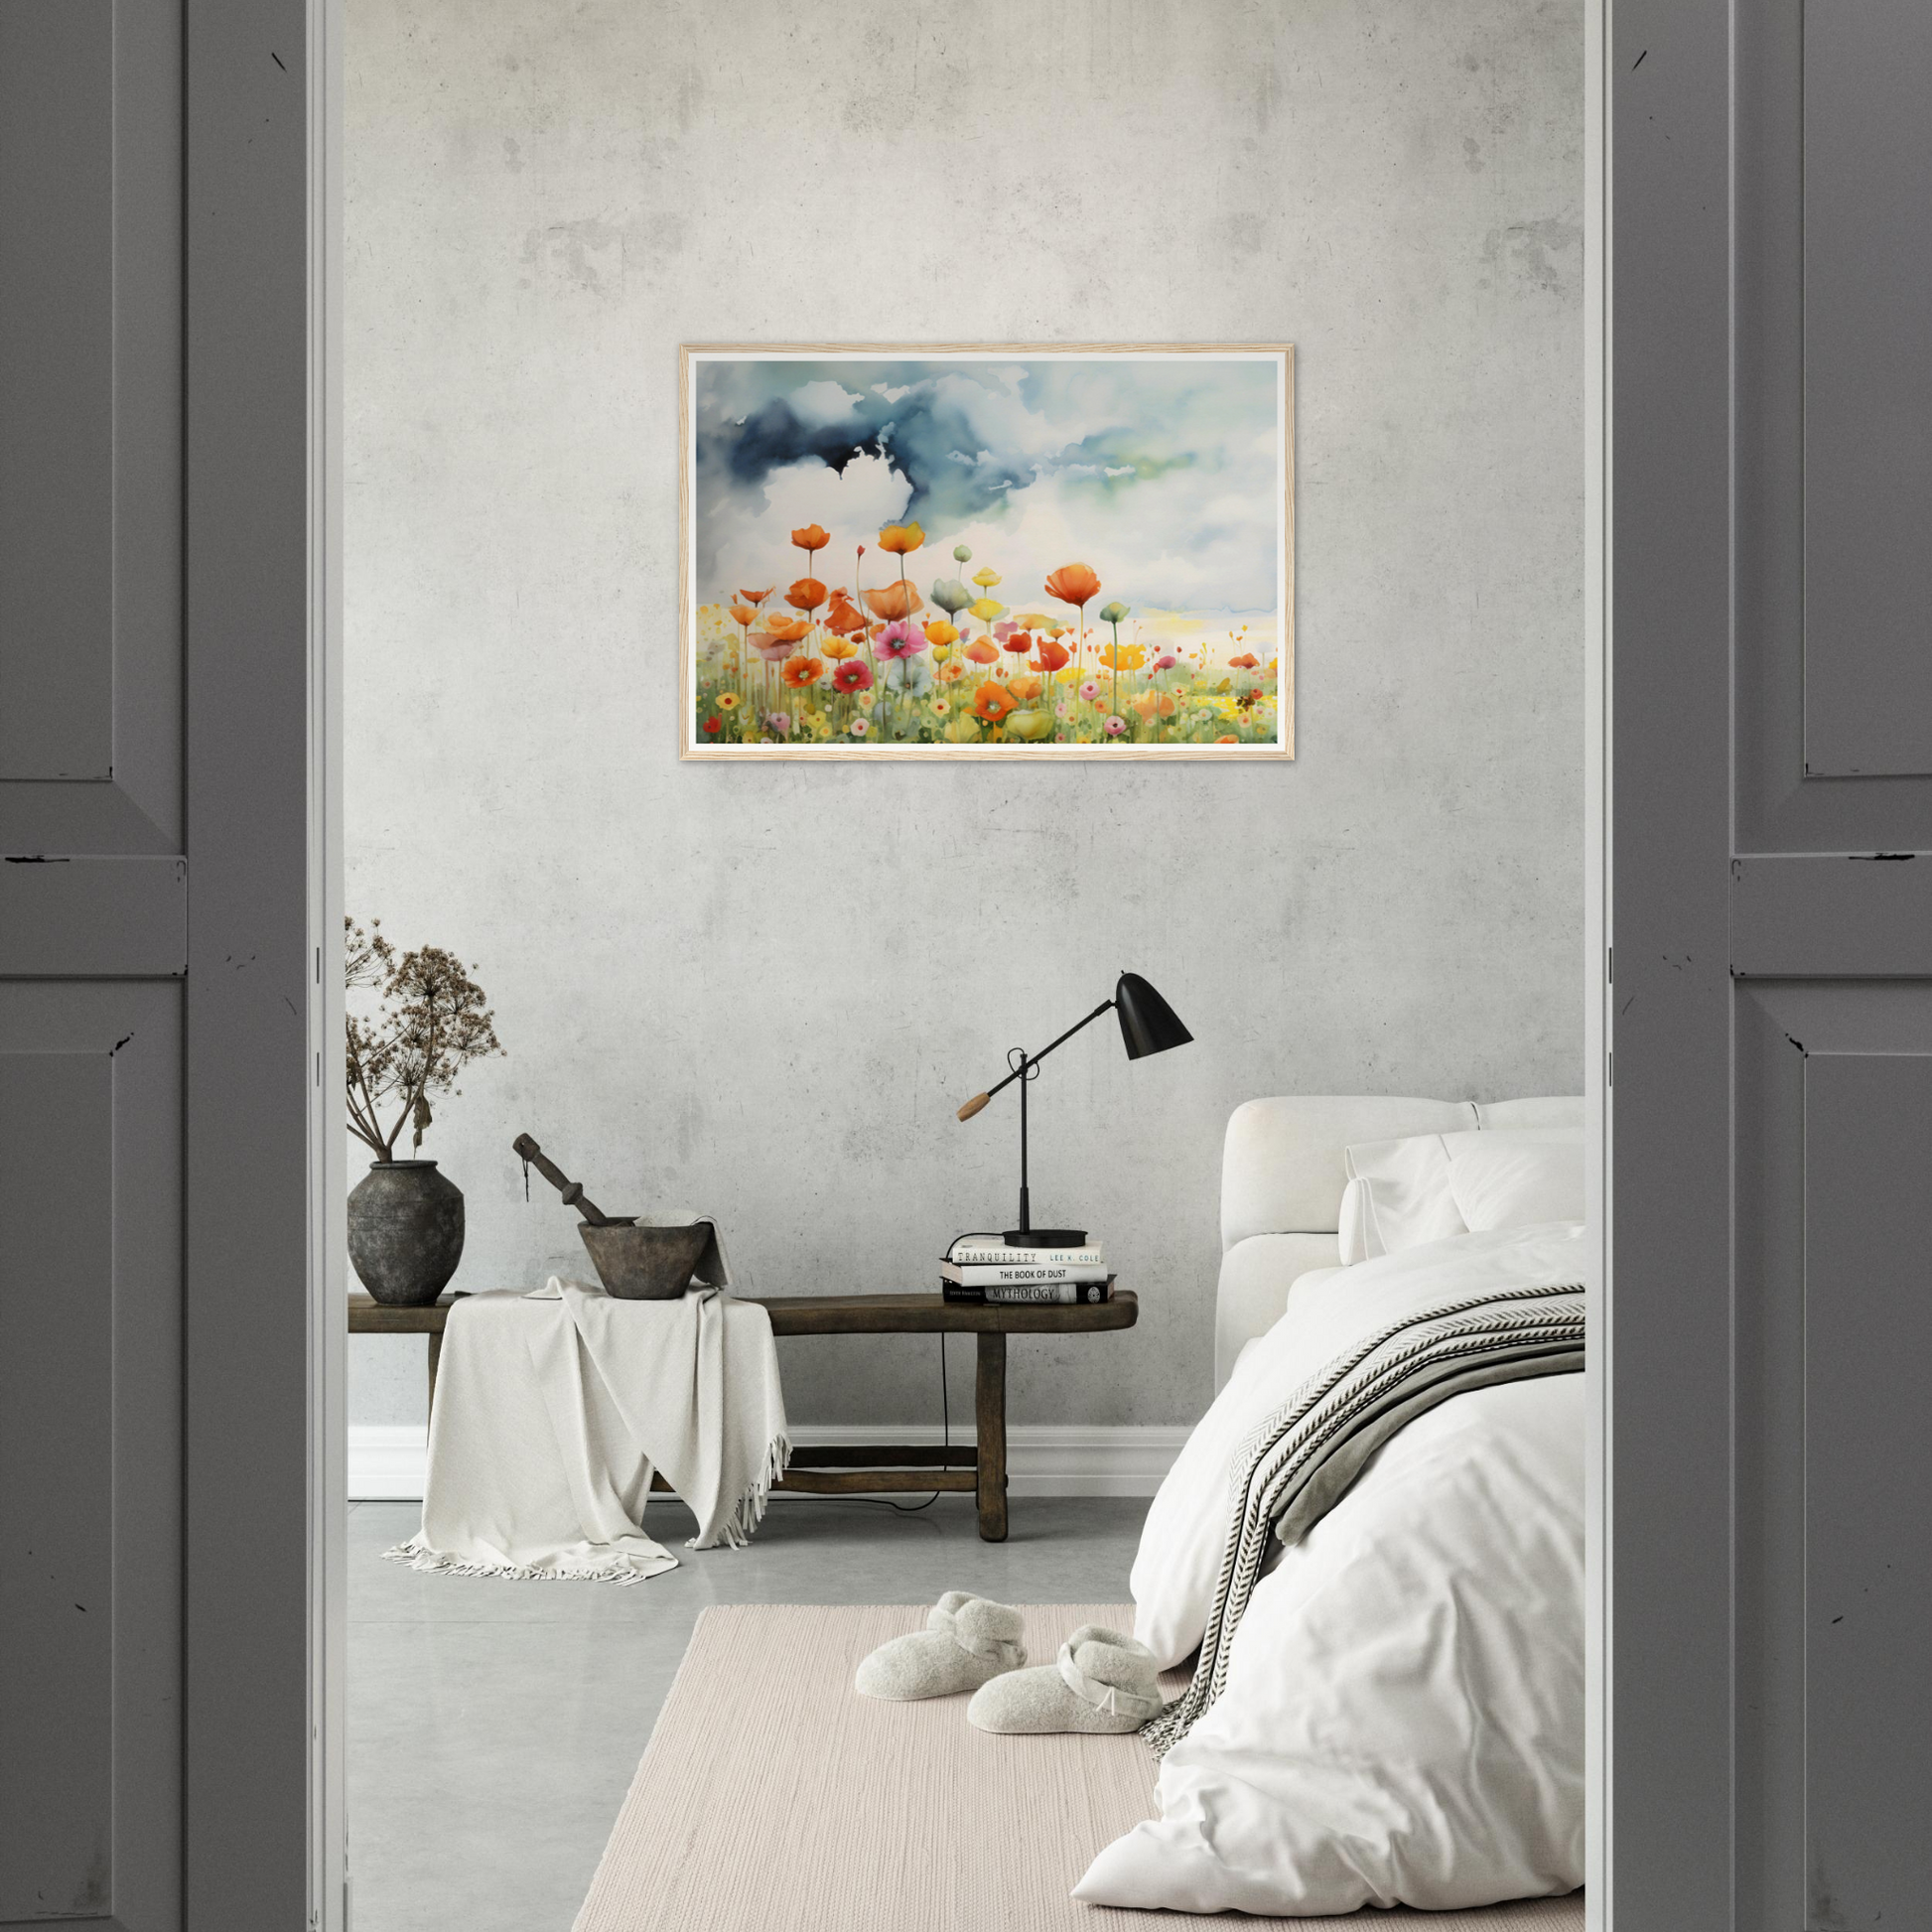 Flowery Heaven B The Oracle Windows™ Collection - framed art print that is guaranteed to transform your space.